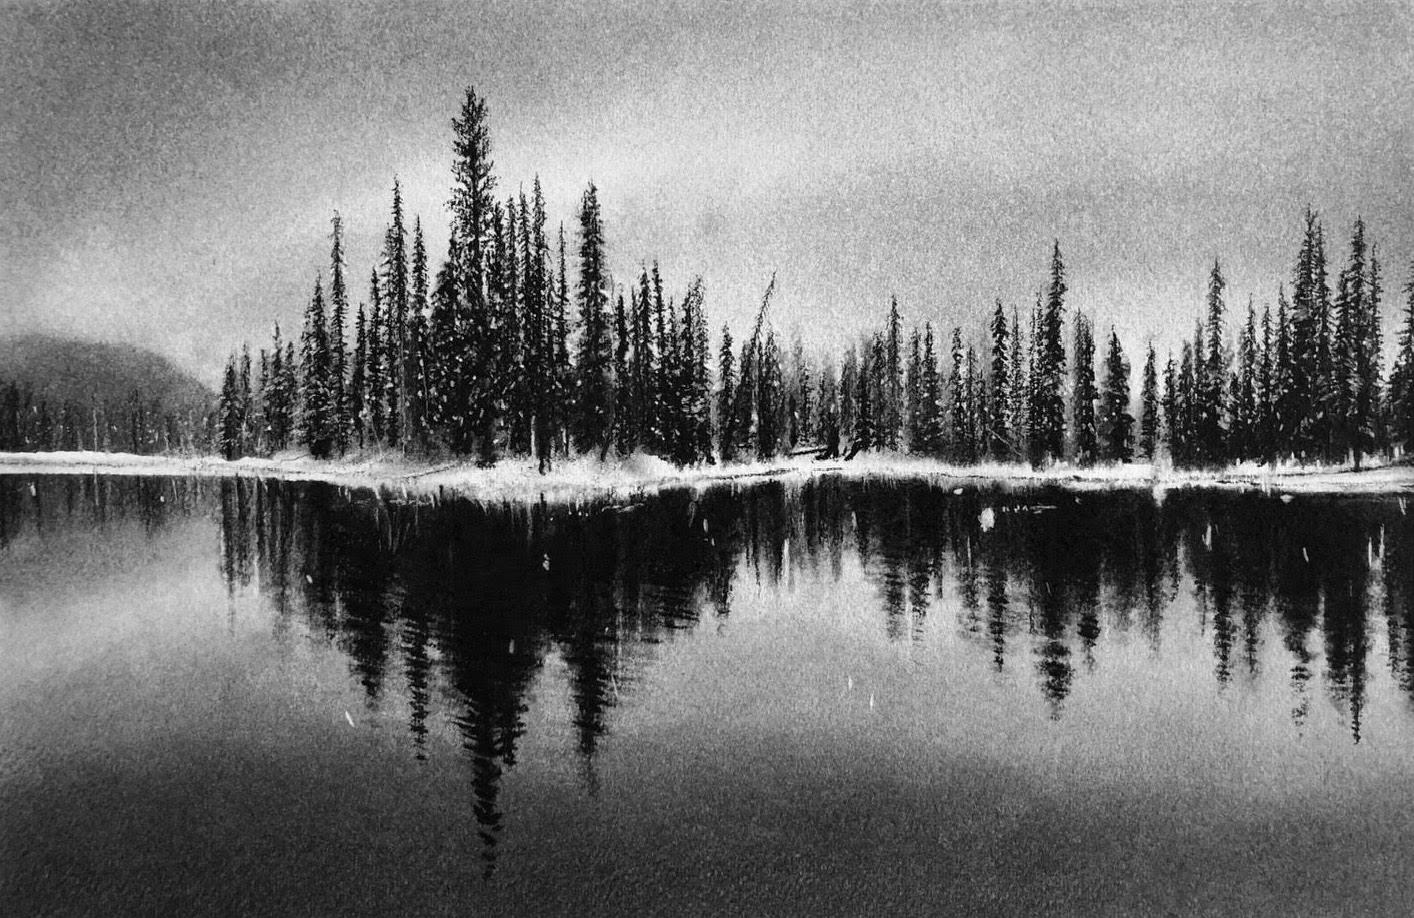 Winter Reflections, black and white charcoal drawing of trees and lake